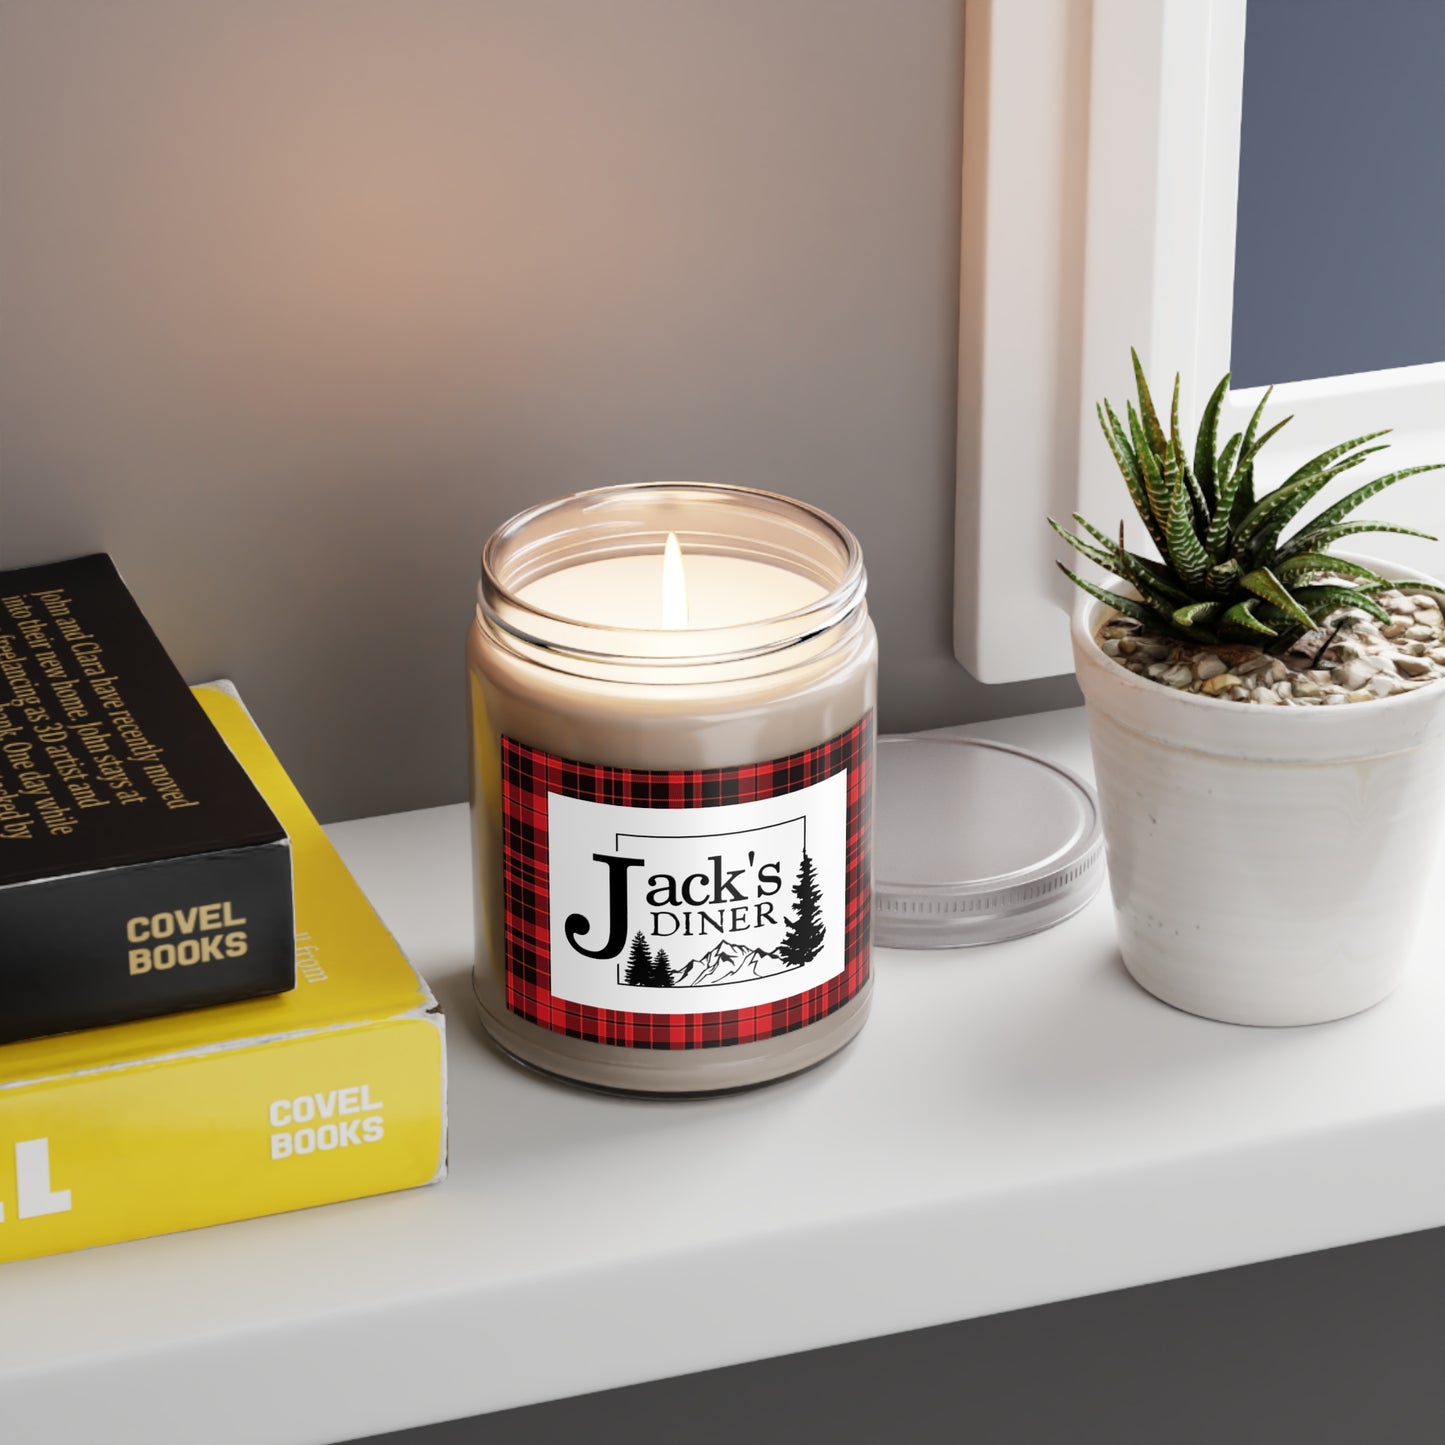 Jack's Diner Scented Soy Candle, 9oz (Holiday Design) - FREE U.S. SHIPPING